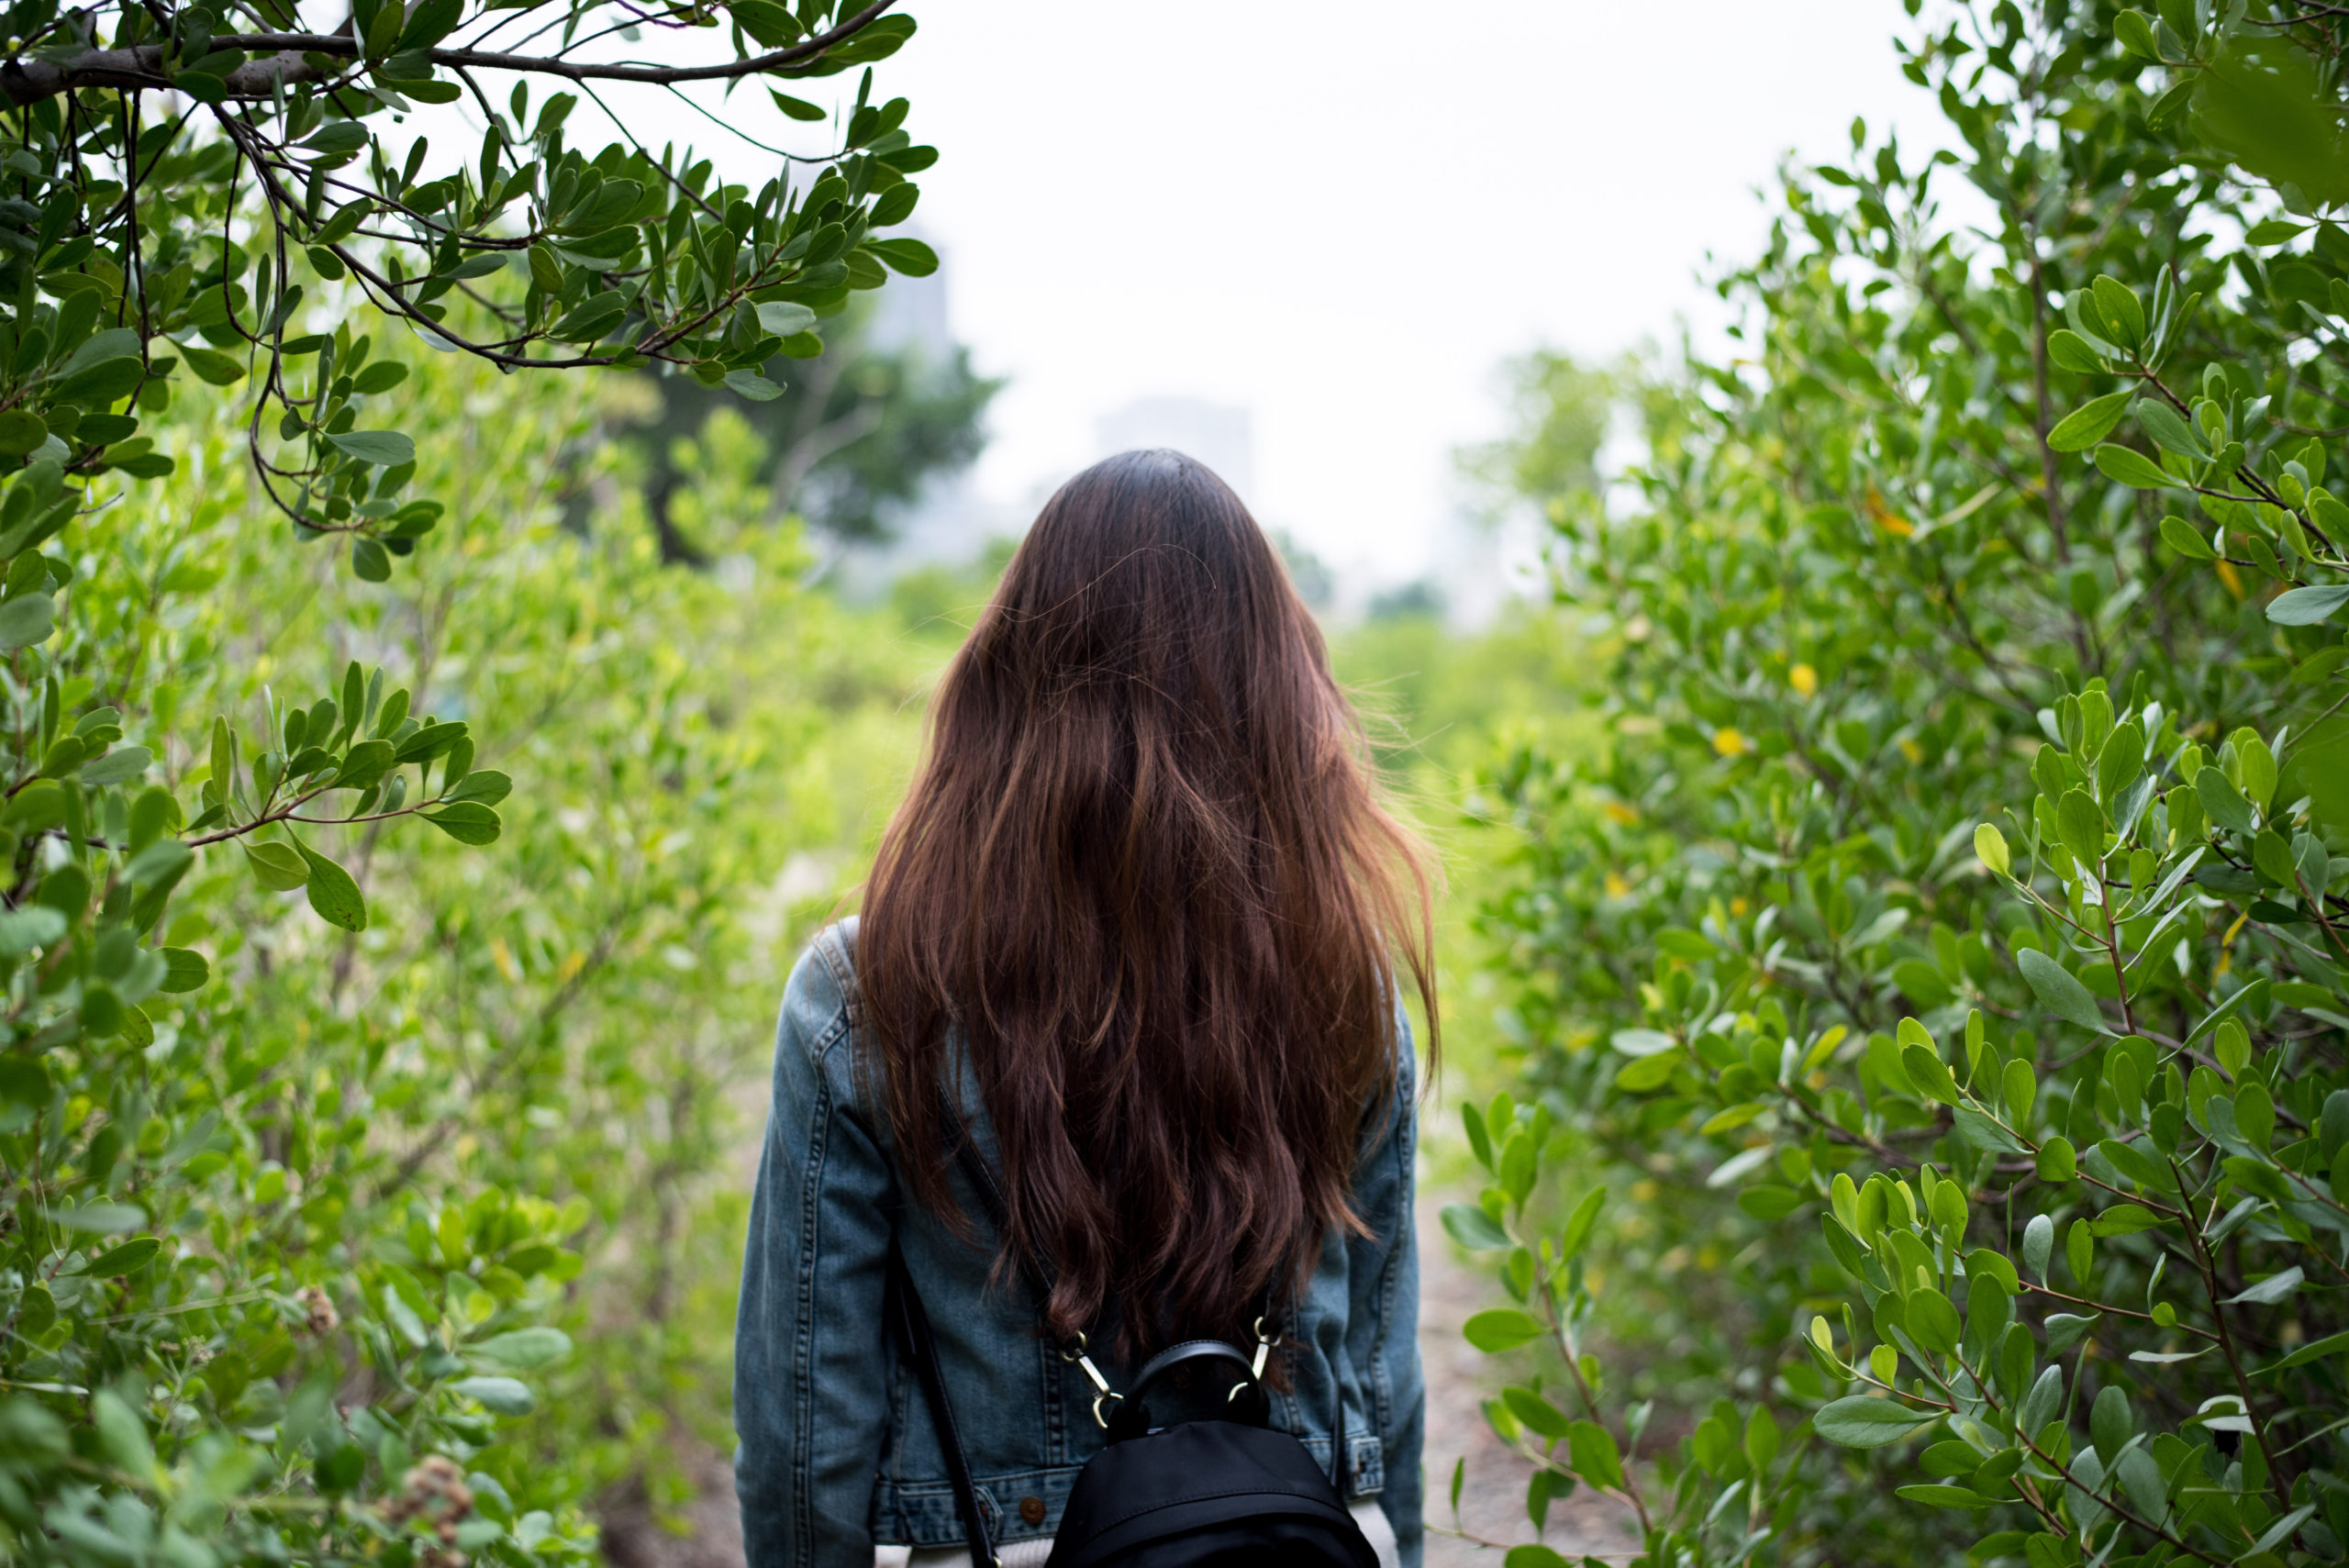 https://suehawkes.com/wp-content/uploads/2020/08/Canva-Woman-in-Gray-Denim-Jacket-in-the-Middle-of-Bushes-scaled.jpg